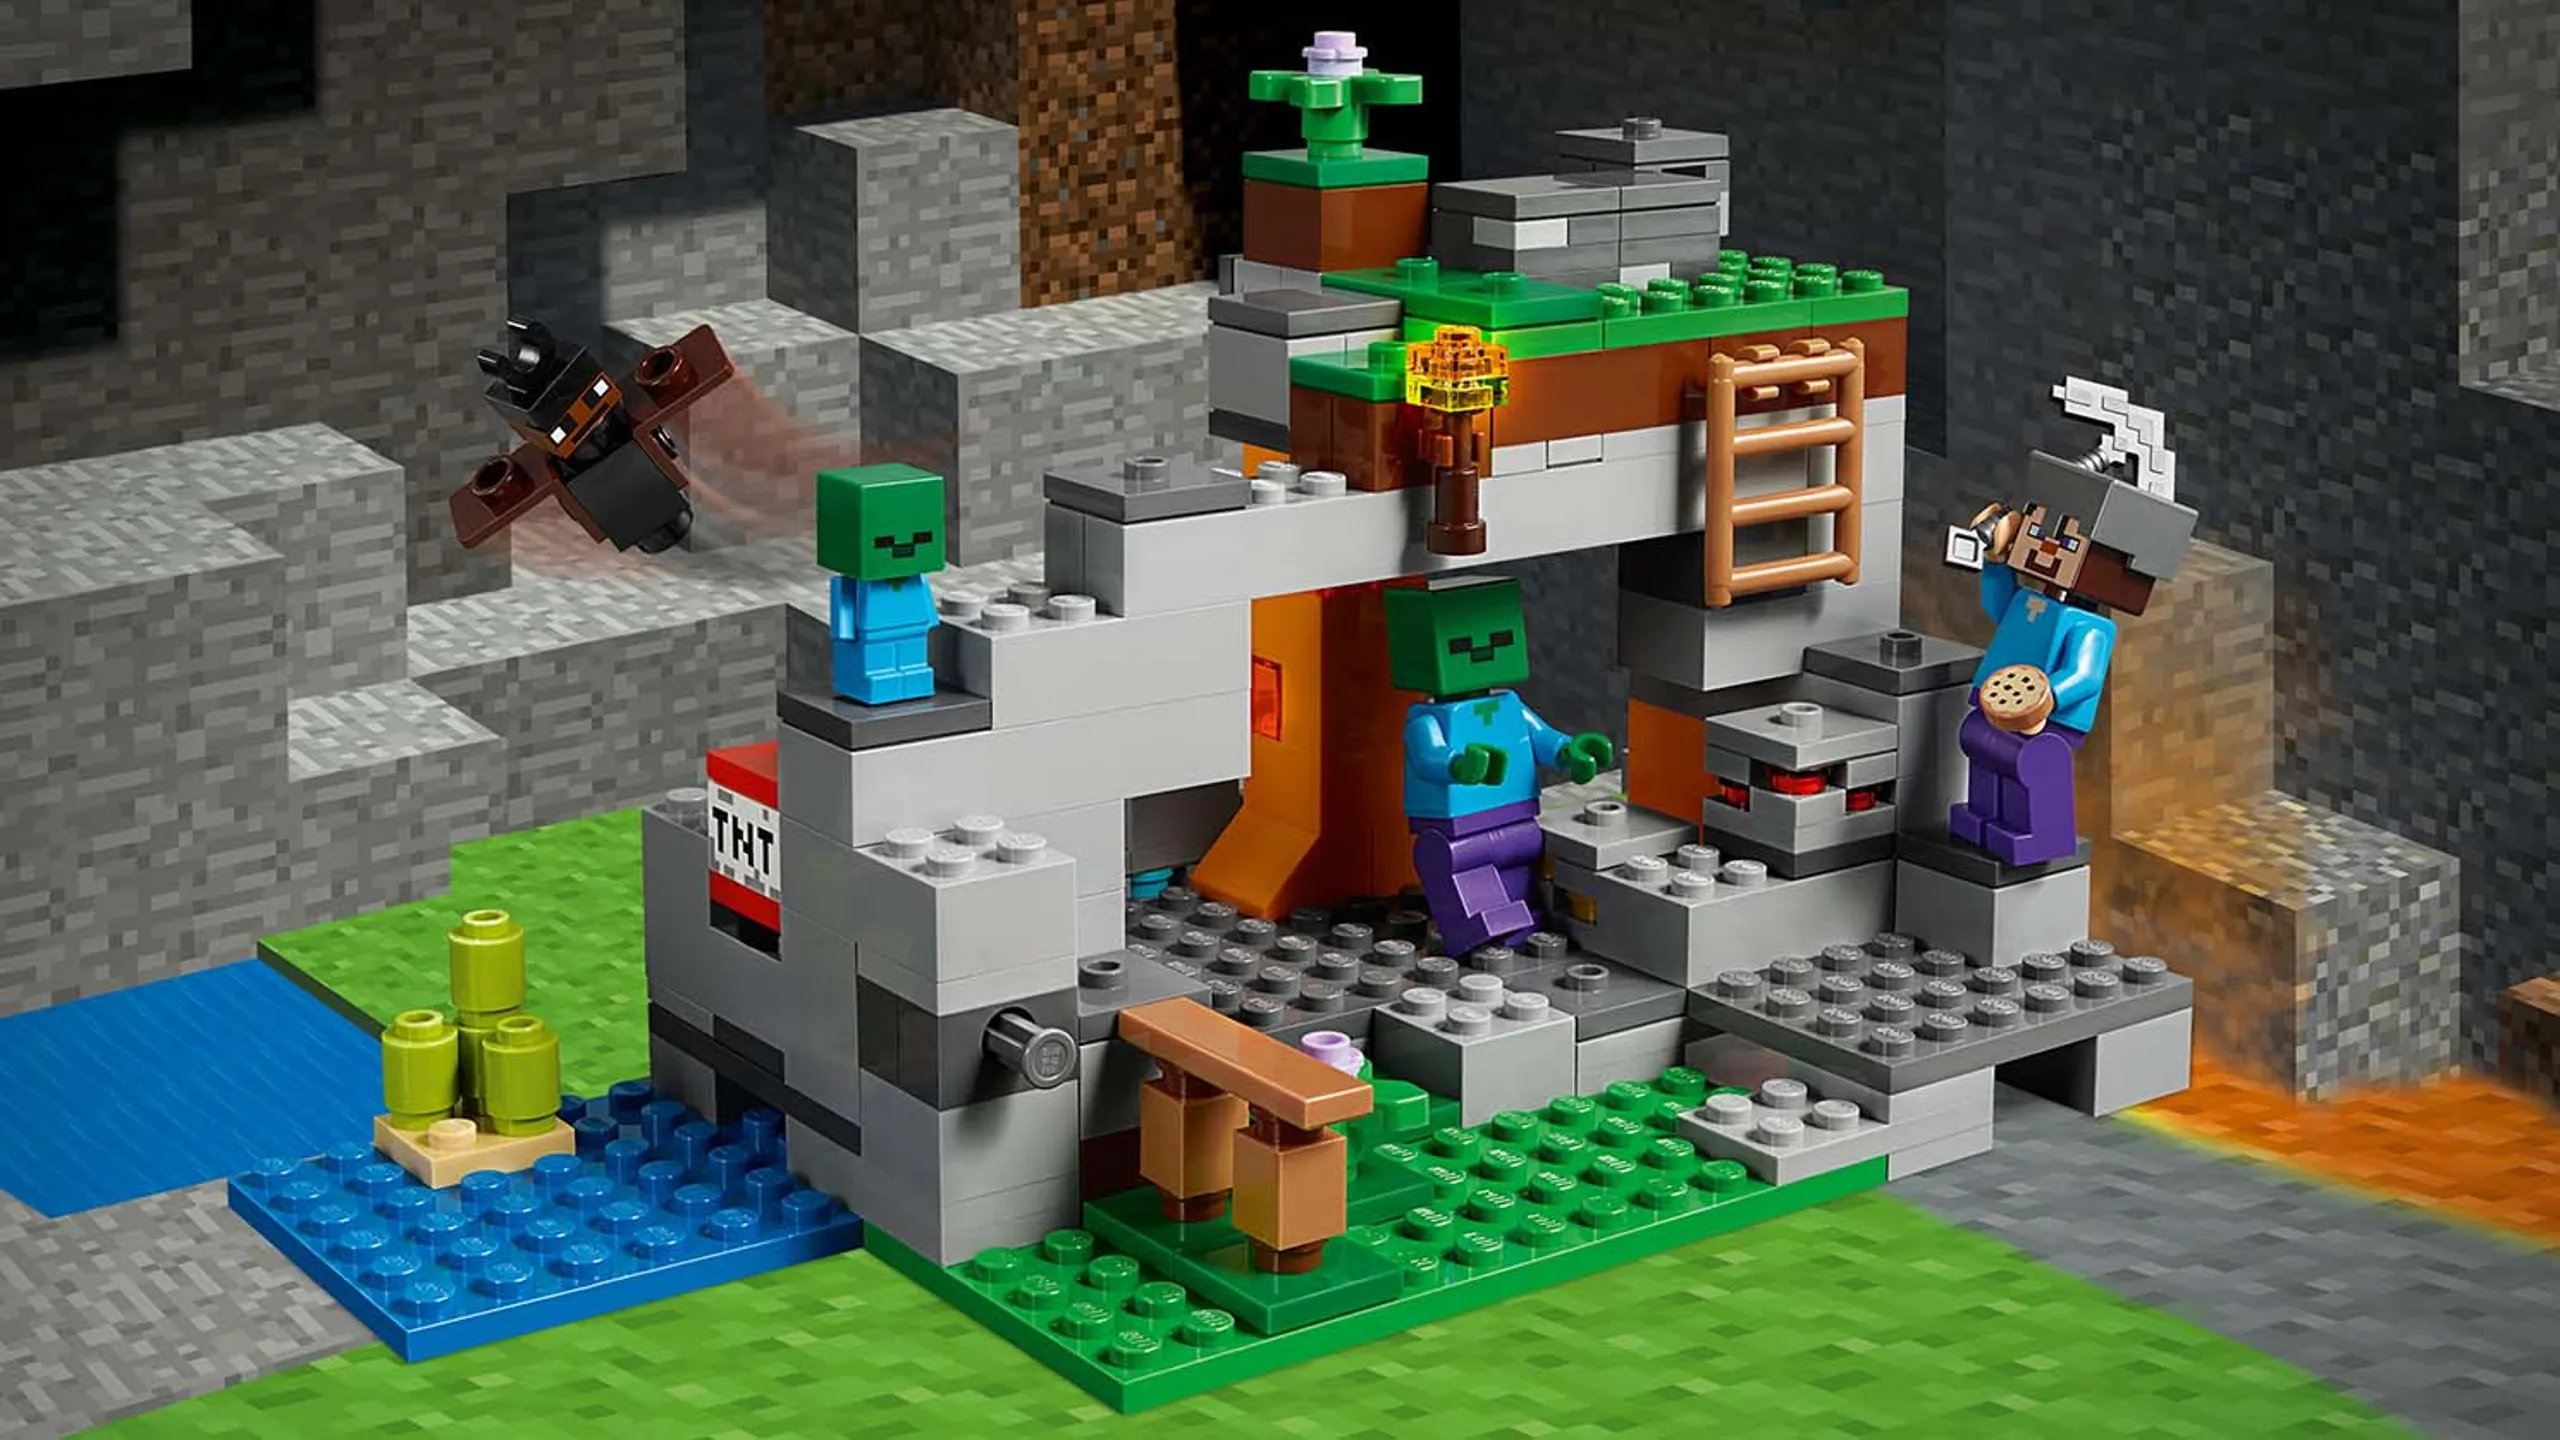 LEGO Minecraft - 21141 the Zombie Cave - Put on your helmet, grab your iron pickaxe and venture to the bat-infested Zombie Cave, complete with ladder and furnace